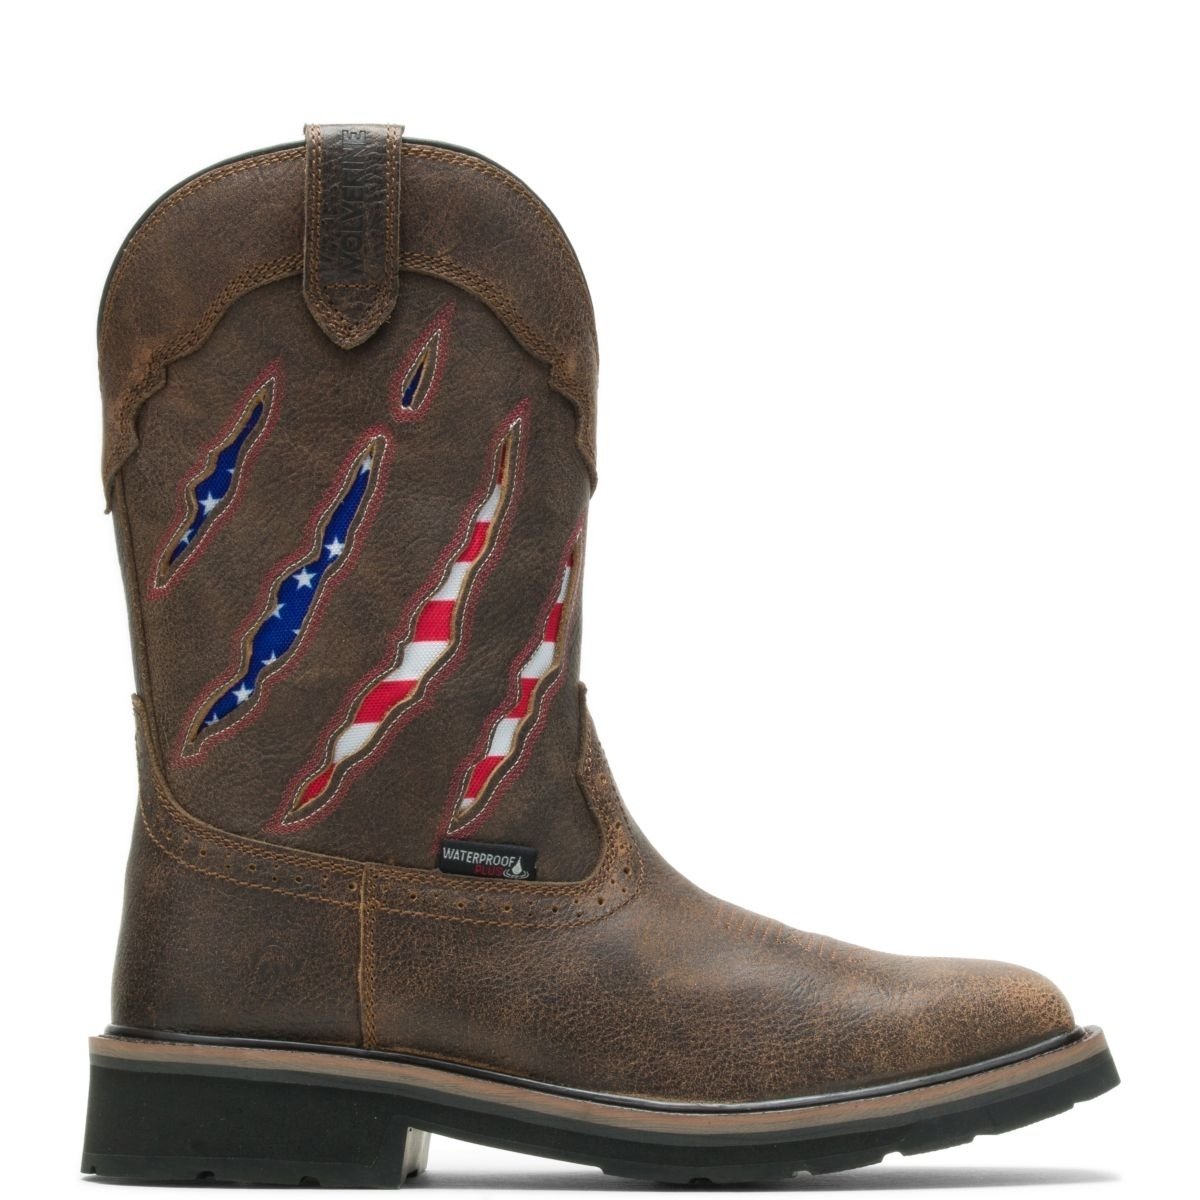 WOLVERINE Men's Rancher Claw Wellington Soft Toe Work Boot Brown/Flag - W200138 Flag/brown - Flag/brown, 13